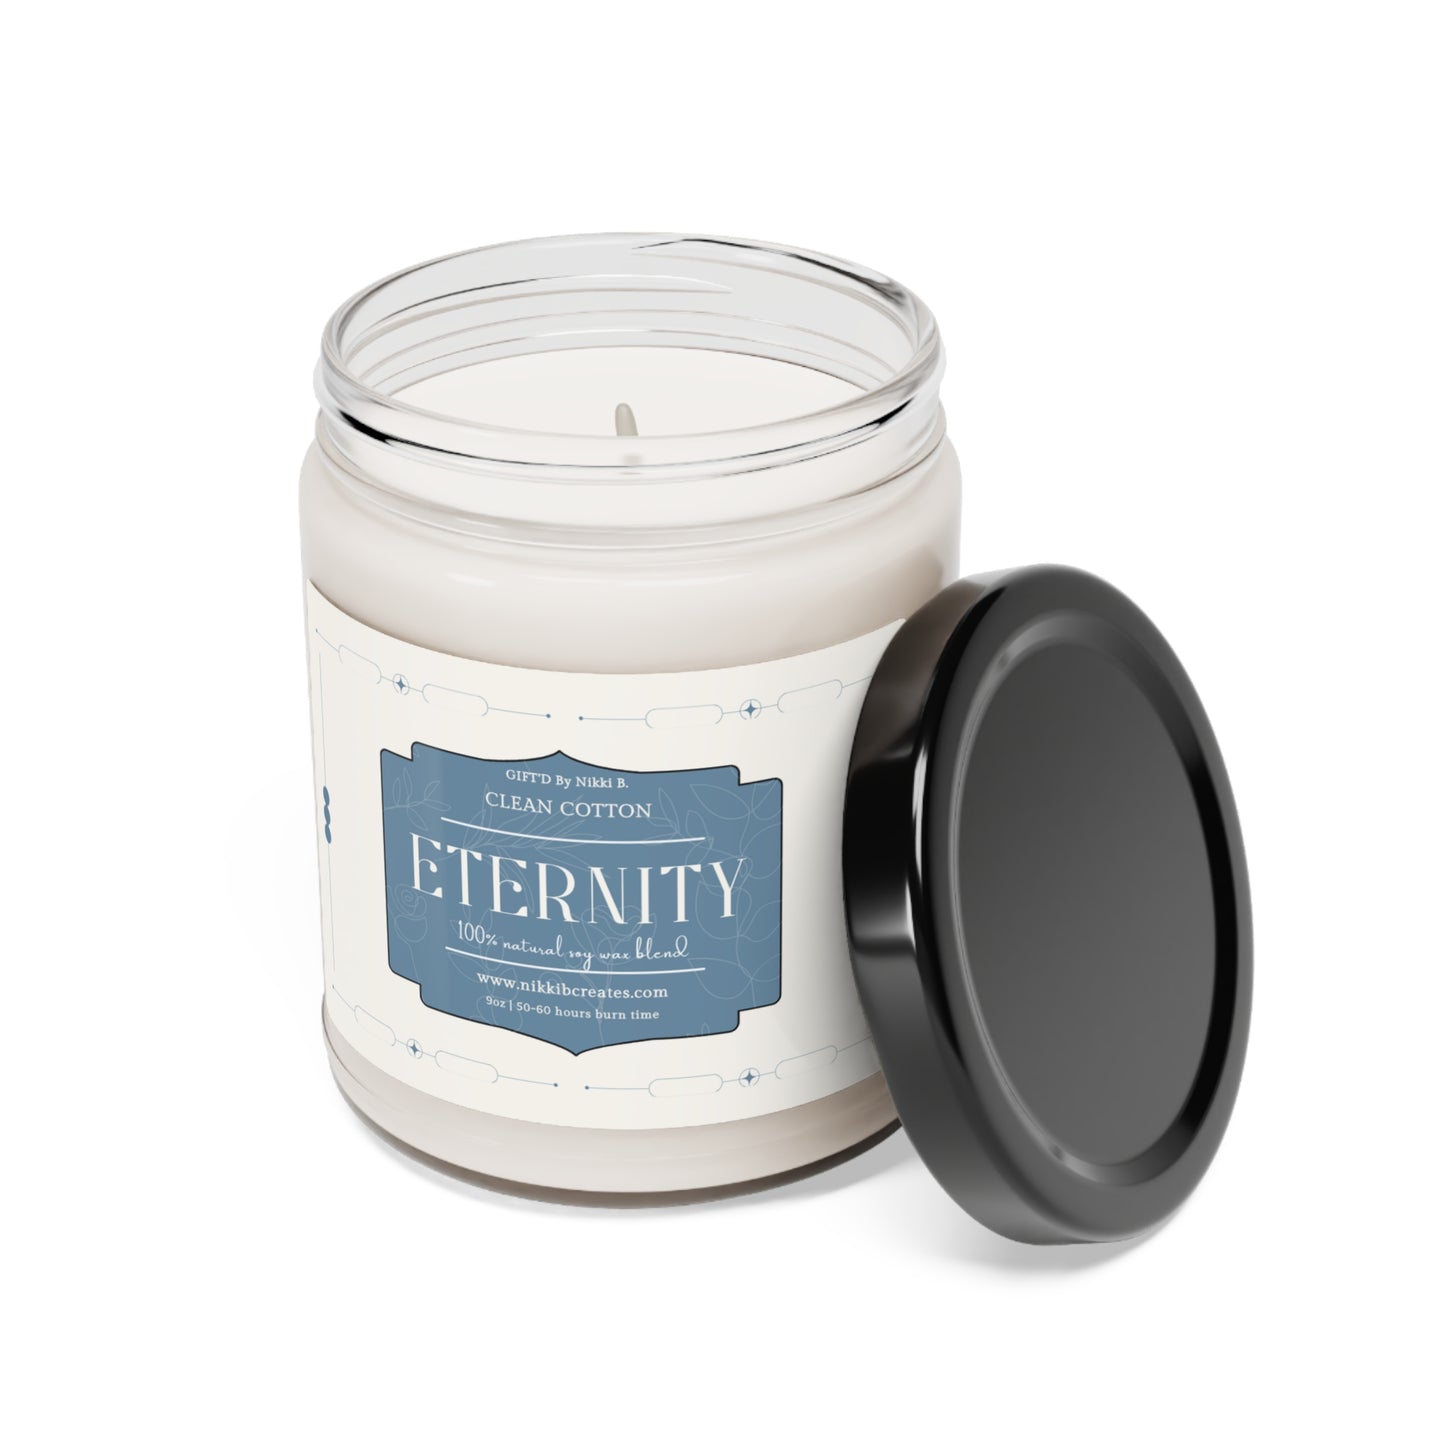 ETERNITY Scented Candle, 9oz